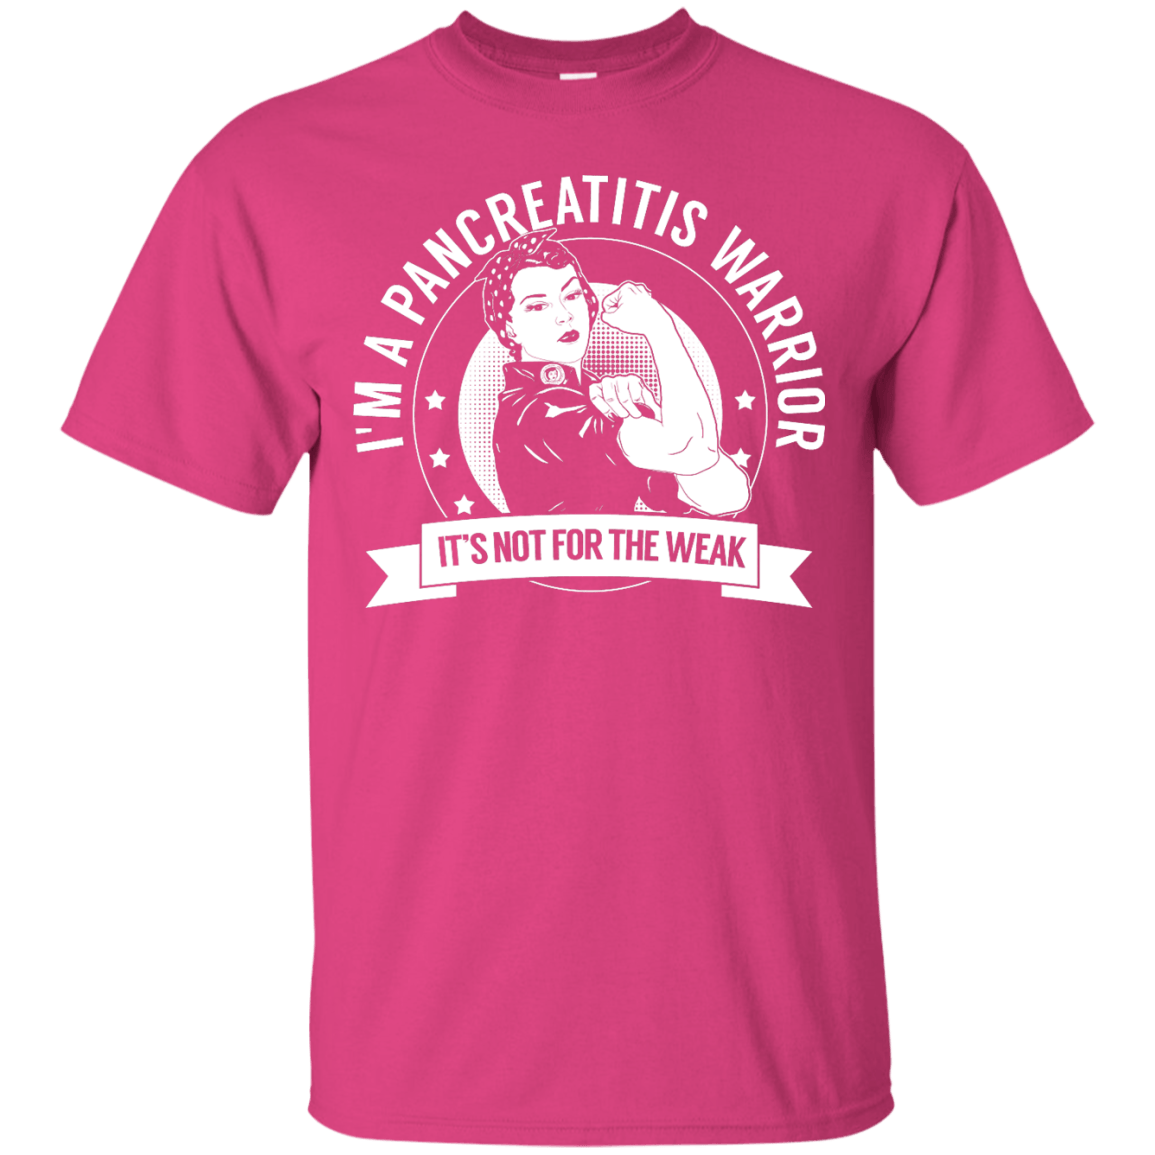 Pancreatitis Warrior Not For The Weak Unisex Shirt - The Unchargeables